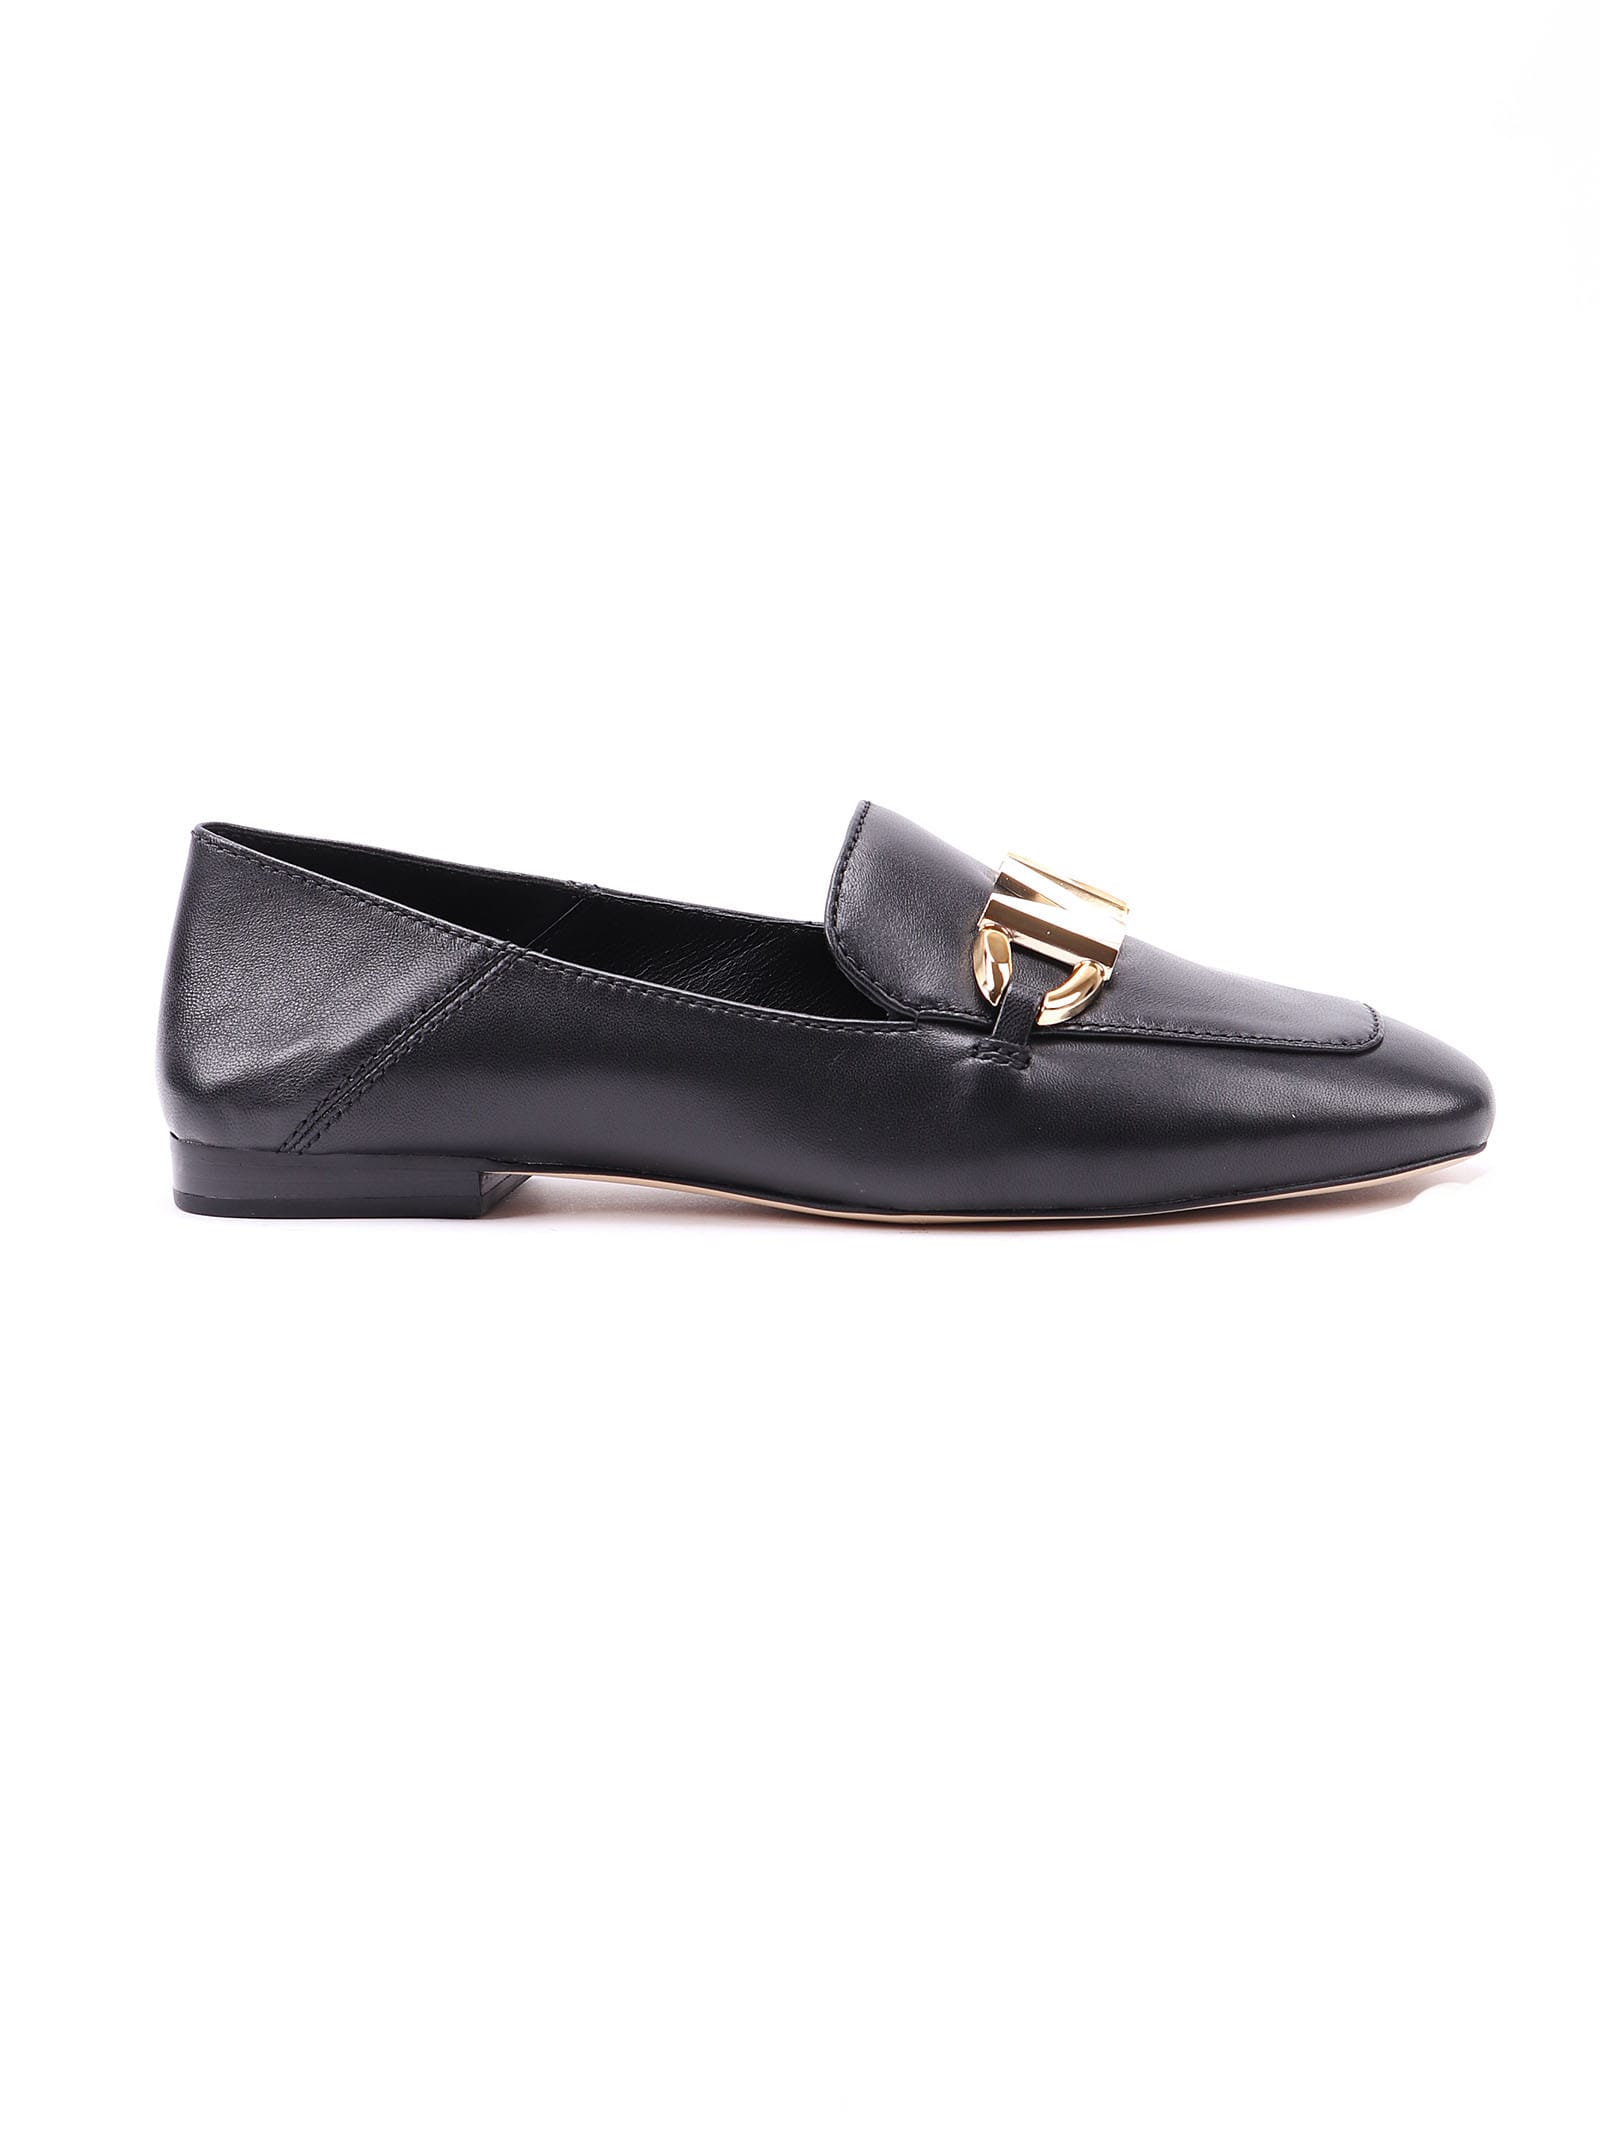 Michael Kors Collection Izzy Loafer